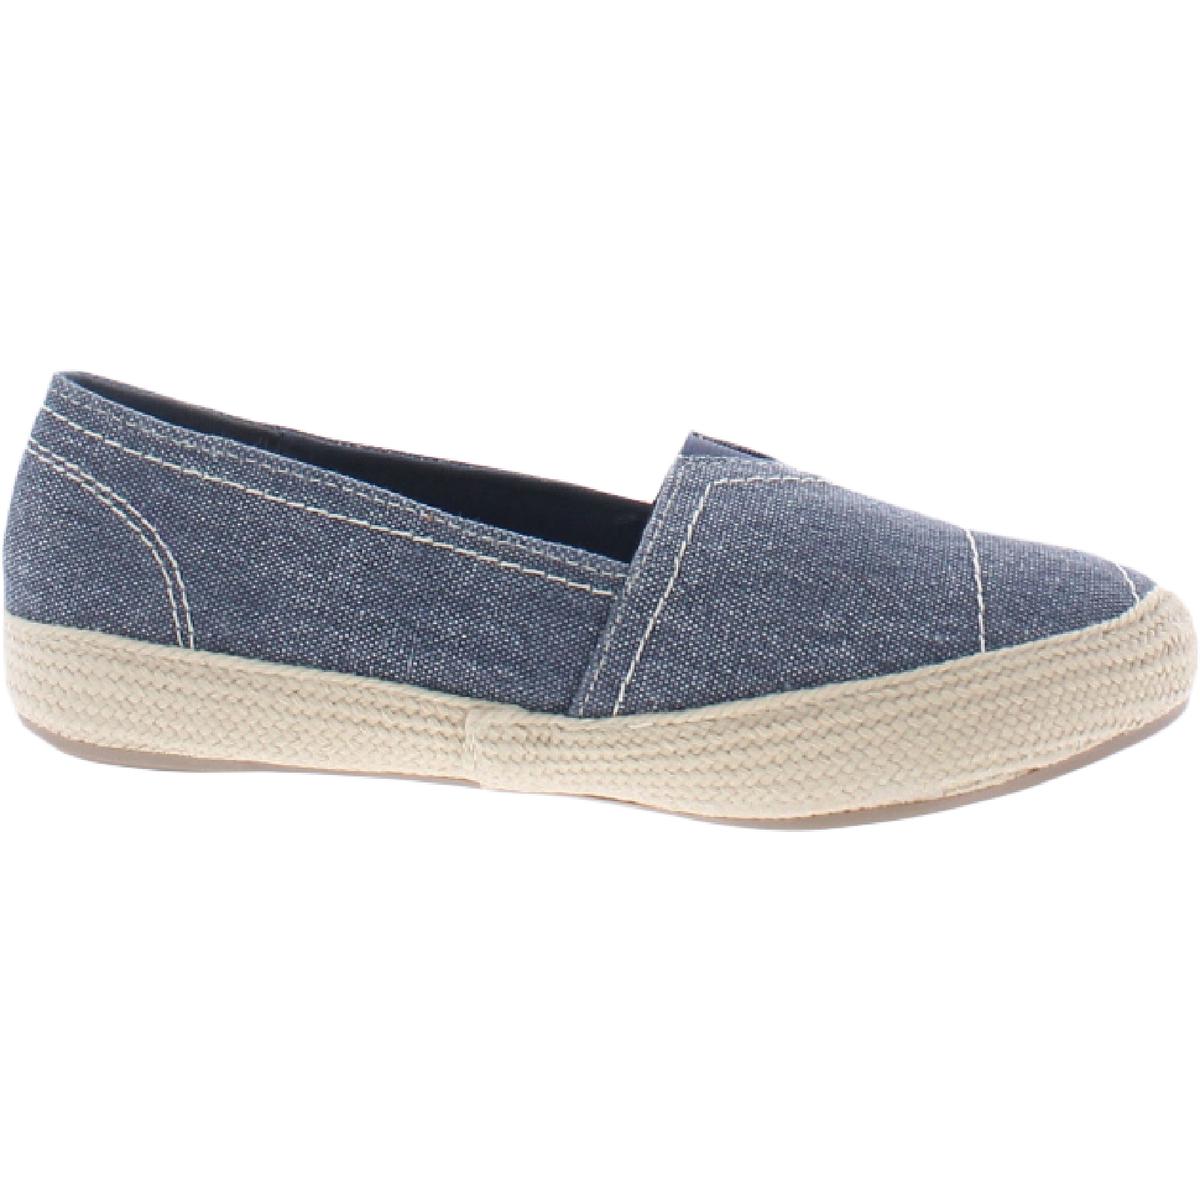 Women's Mia Amore FREEDOM Denim Slip-on Loafer Shoes